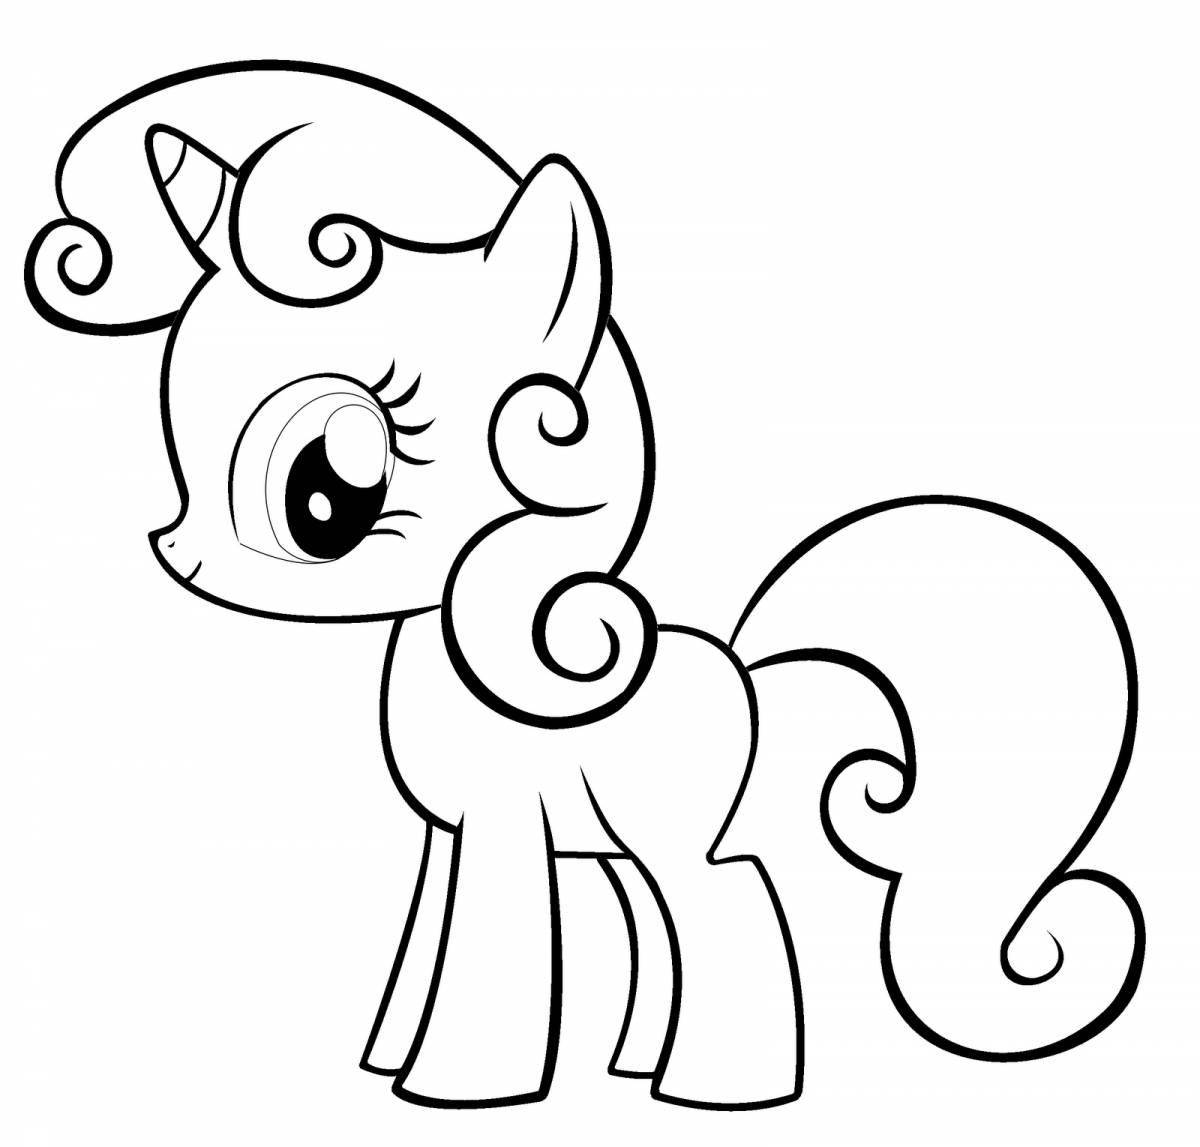 Exquisite pony drawing coloring book